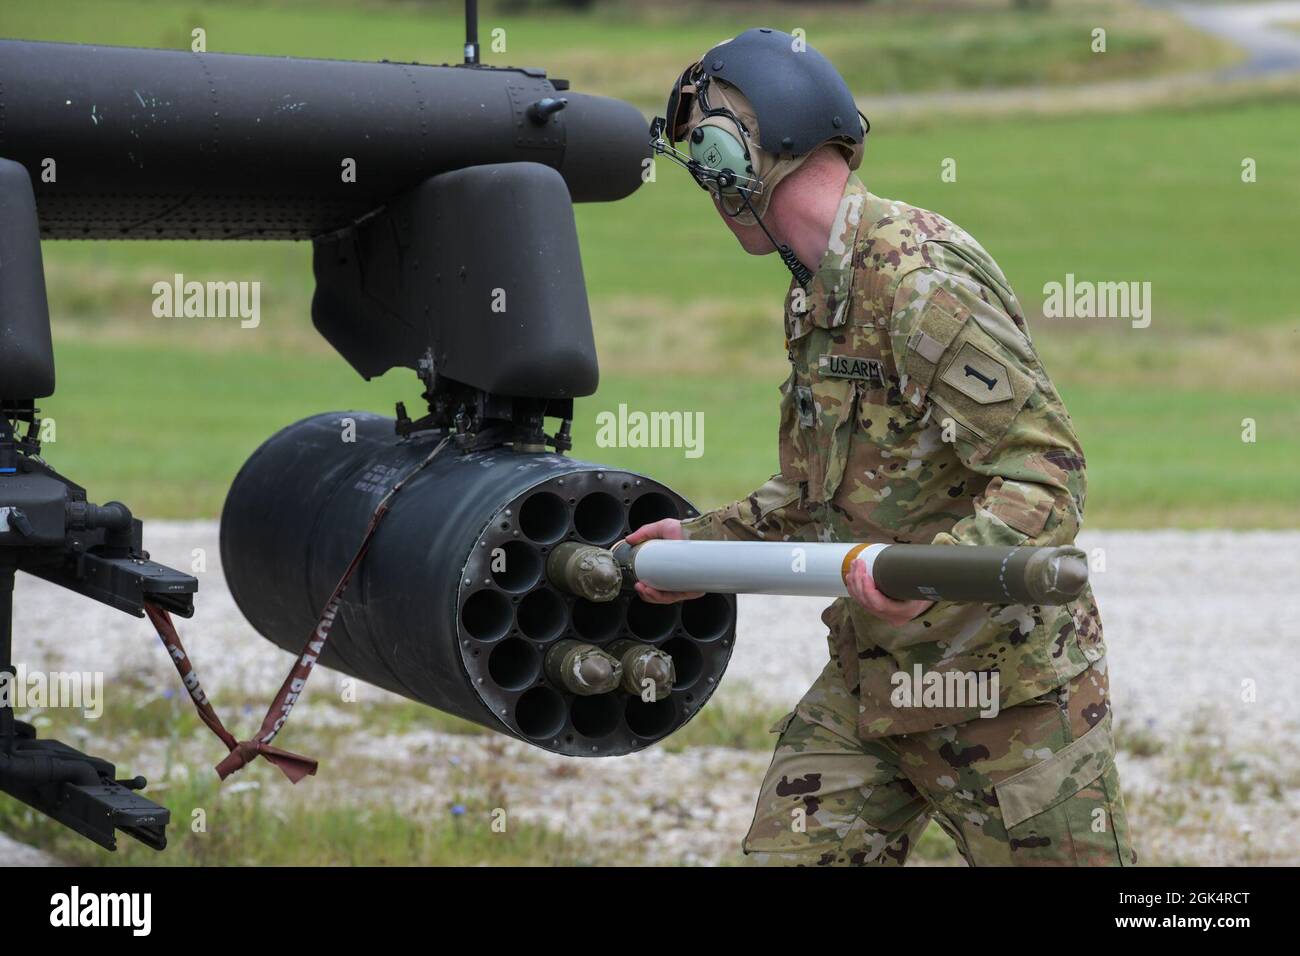 U.S. Army Spc. Robby Anderson, assigned to 1st Combat Aviation Brigade, 1st Infantry Division, inserts a rocket into the launcher of a AH-64D Apache Longbow attack helicopter prior to aerial gunnery training at the 7th Army Training Command's Grafenwoehr Training Area, Germany, Aug. 4, 2021. Stock Photo